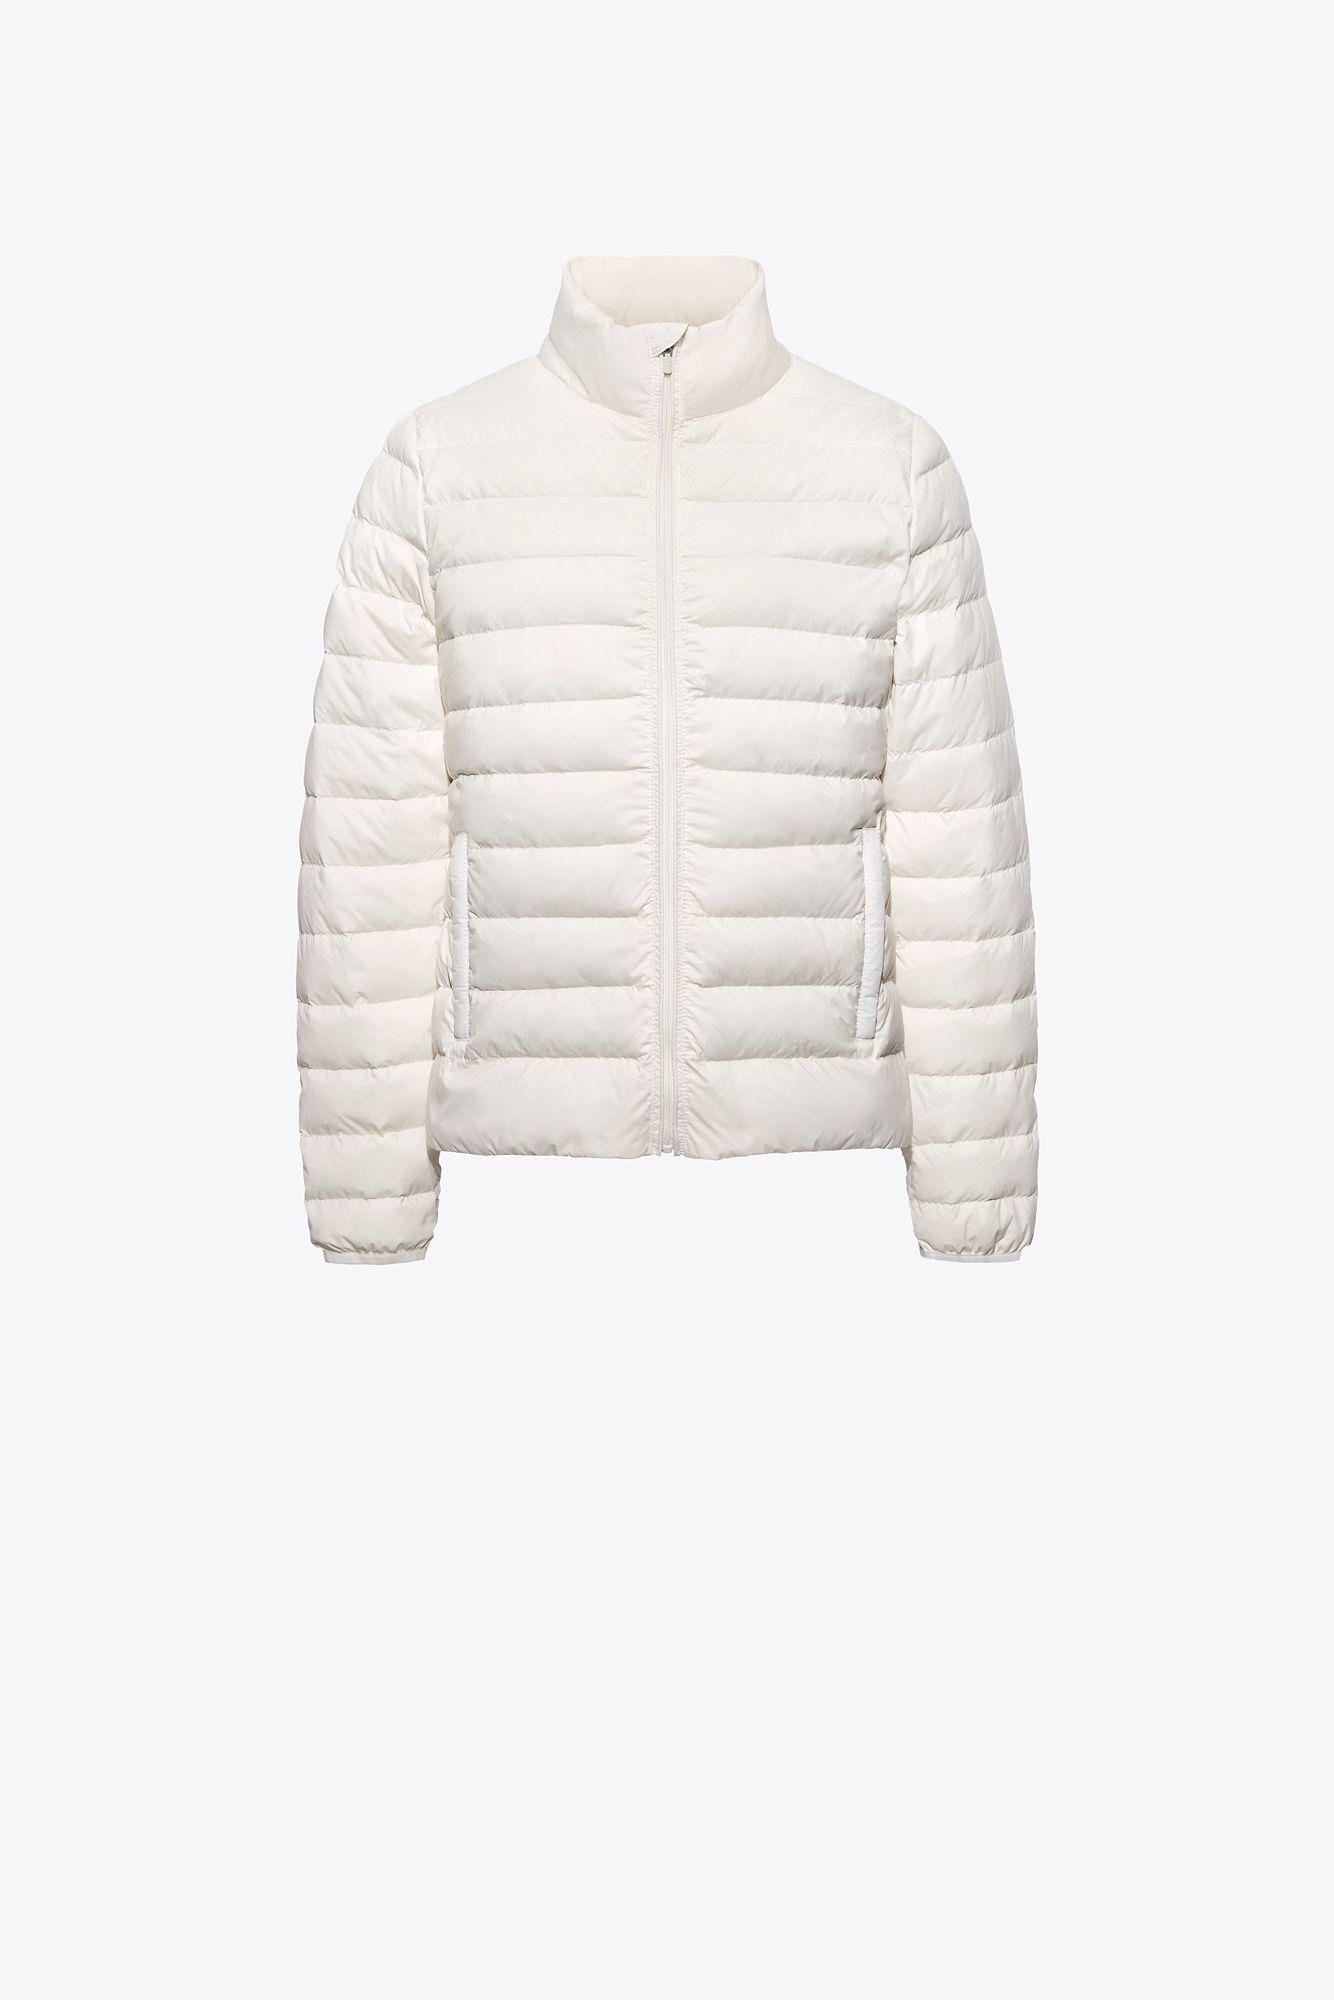 Tory Sport Tory Burch Packable Down Jacket in White | Lyst